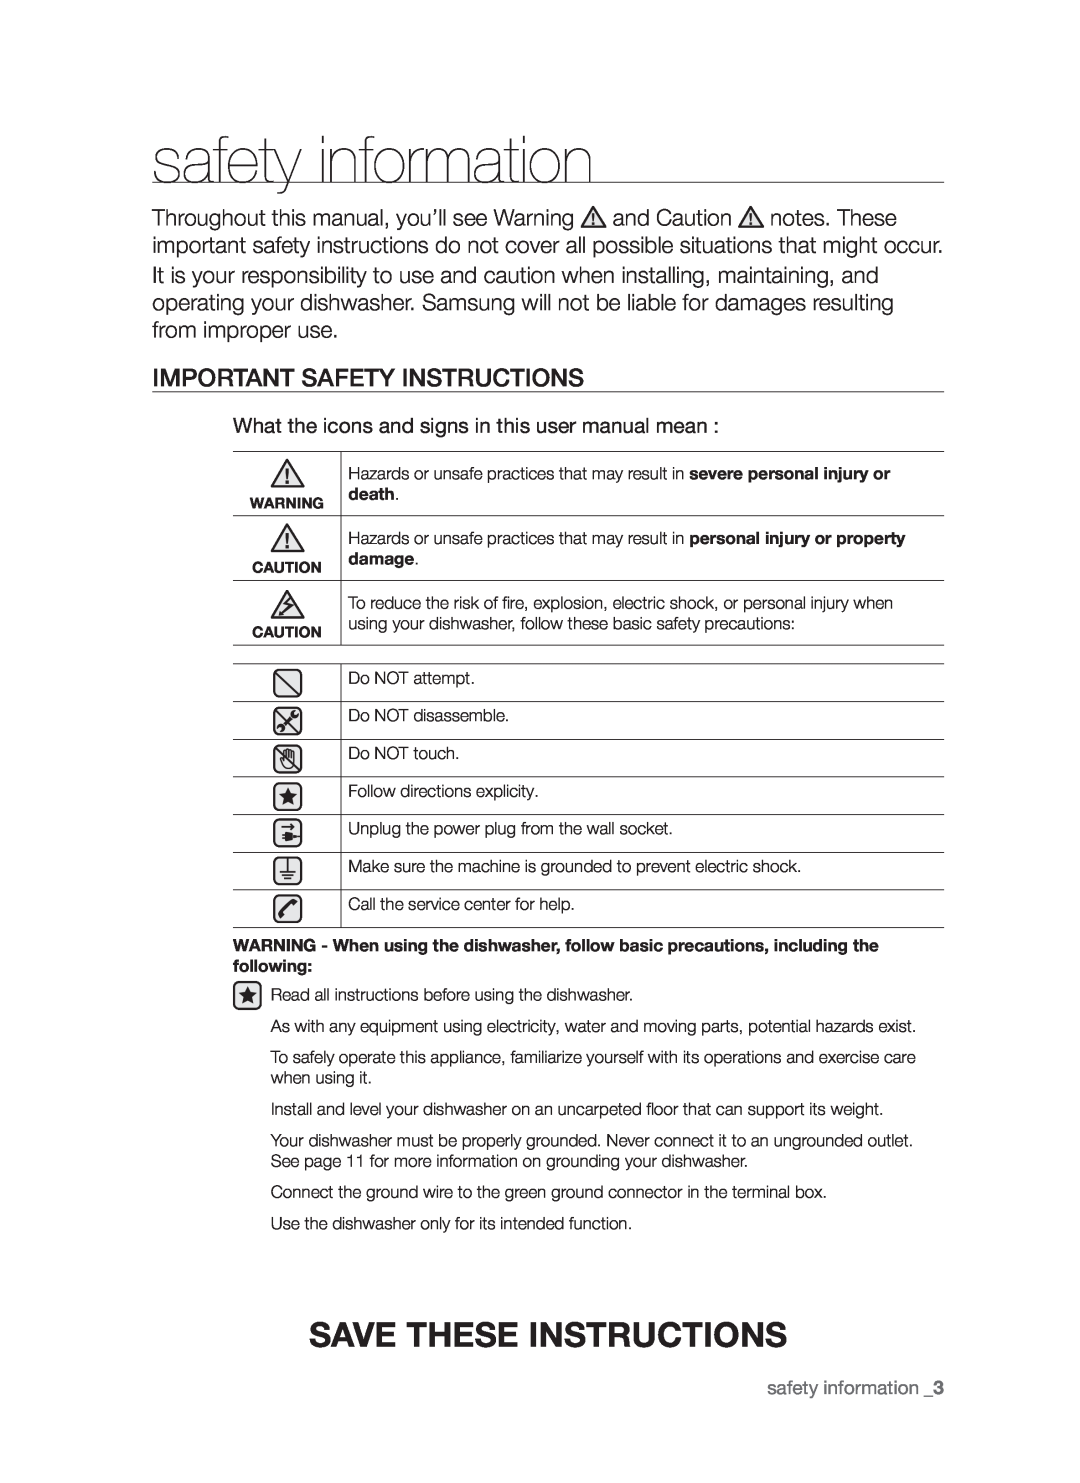 Samsung DMR57LHS, DMR57LHW, DMR57LHB user manual safety information, Save these instructions, Important safety instructions 